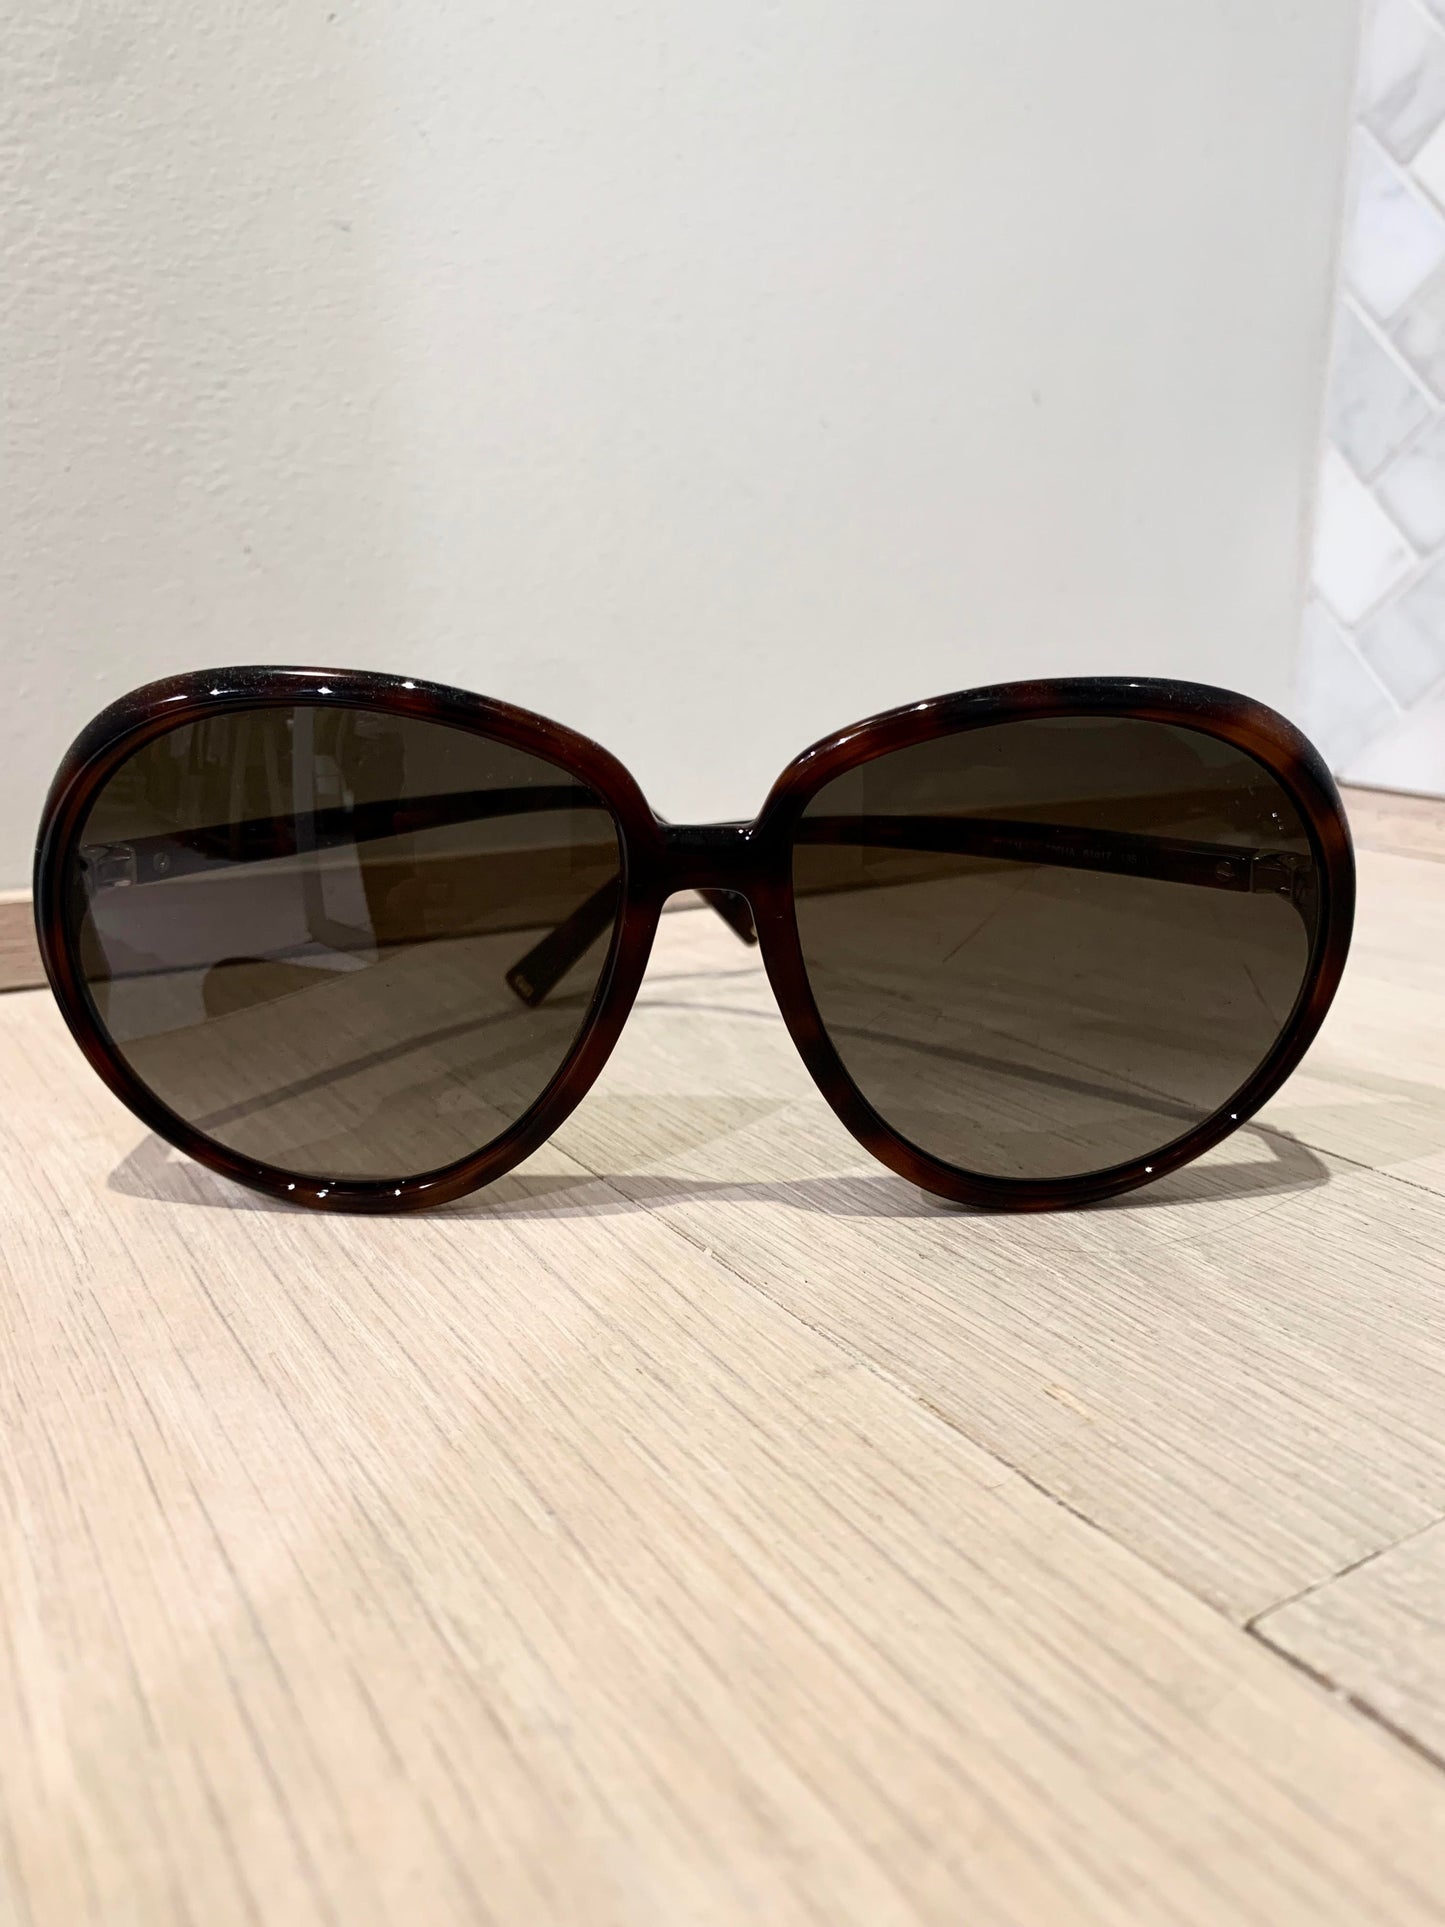 GIVENCHY - SUNGLASSES - ROUND OVERSIZE (2 Colors)